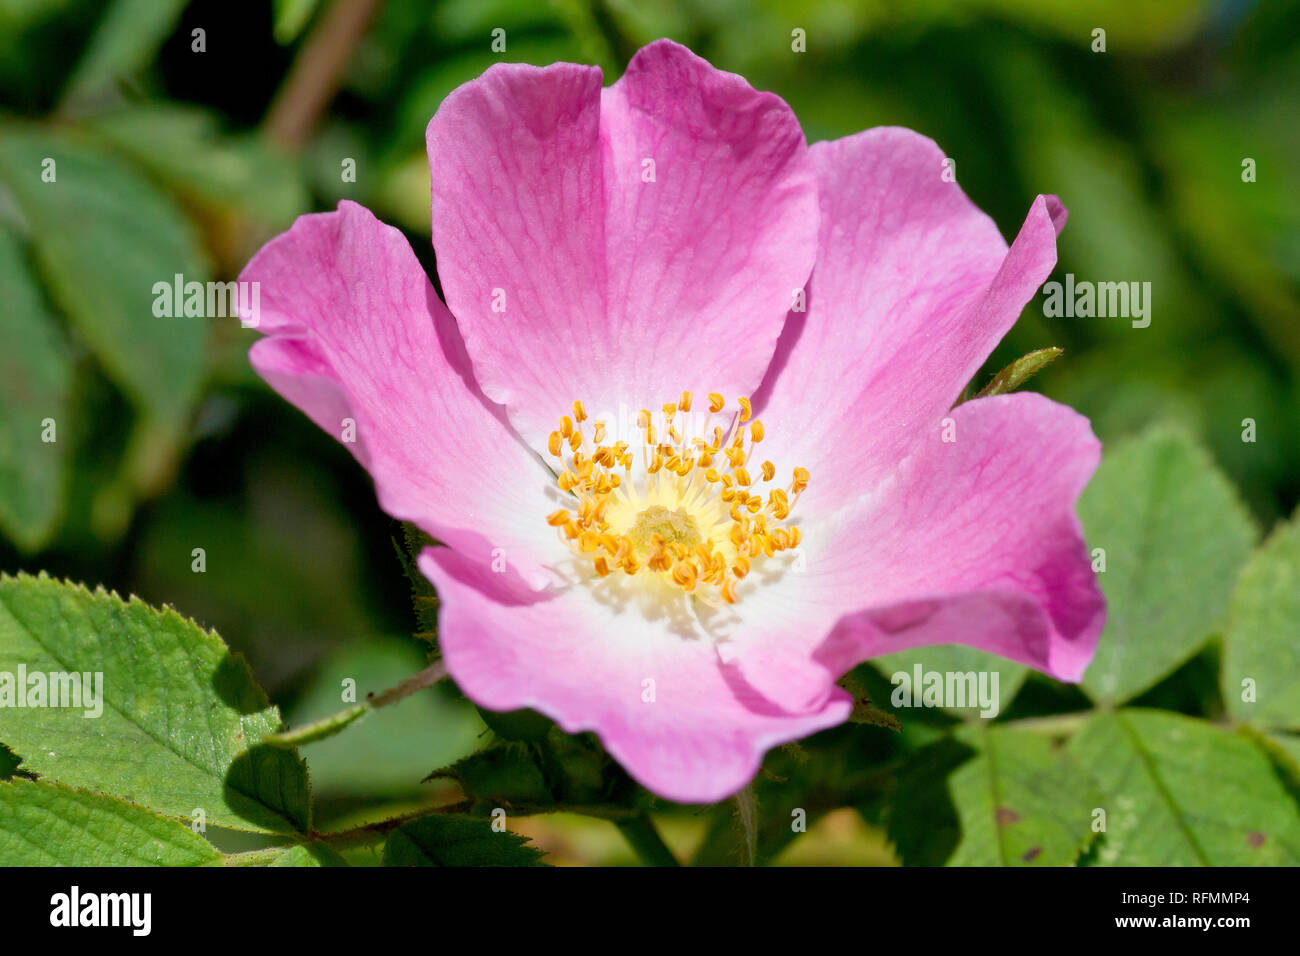 Wild Rose, possibly Harsh Downy Rose (rosa tomentosa), close up of a solitary flower. Stock Photo